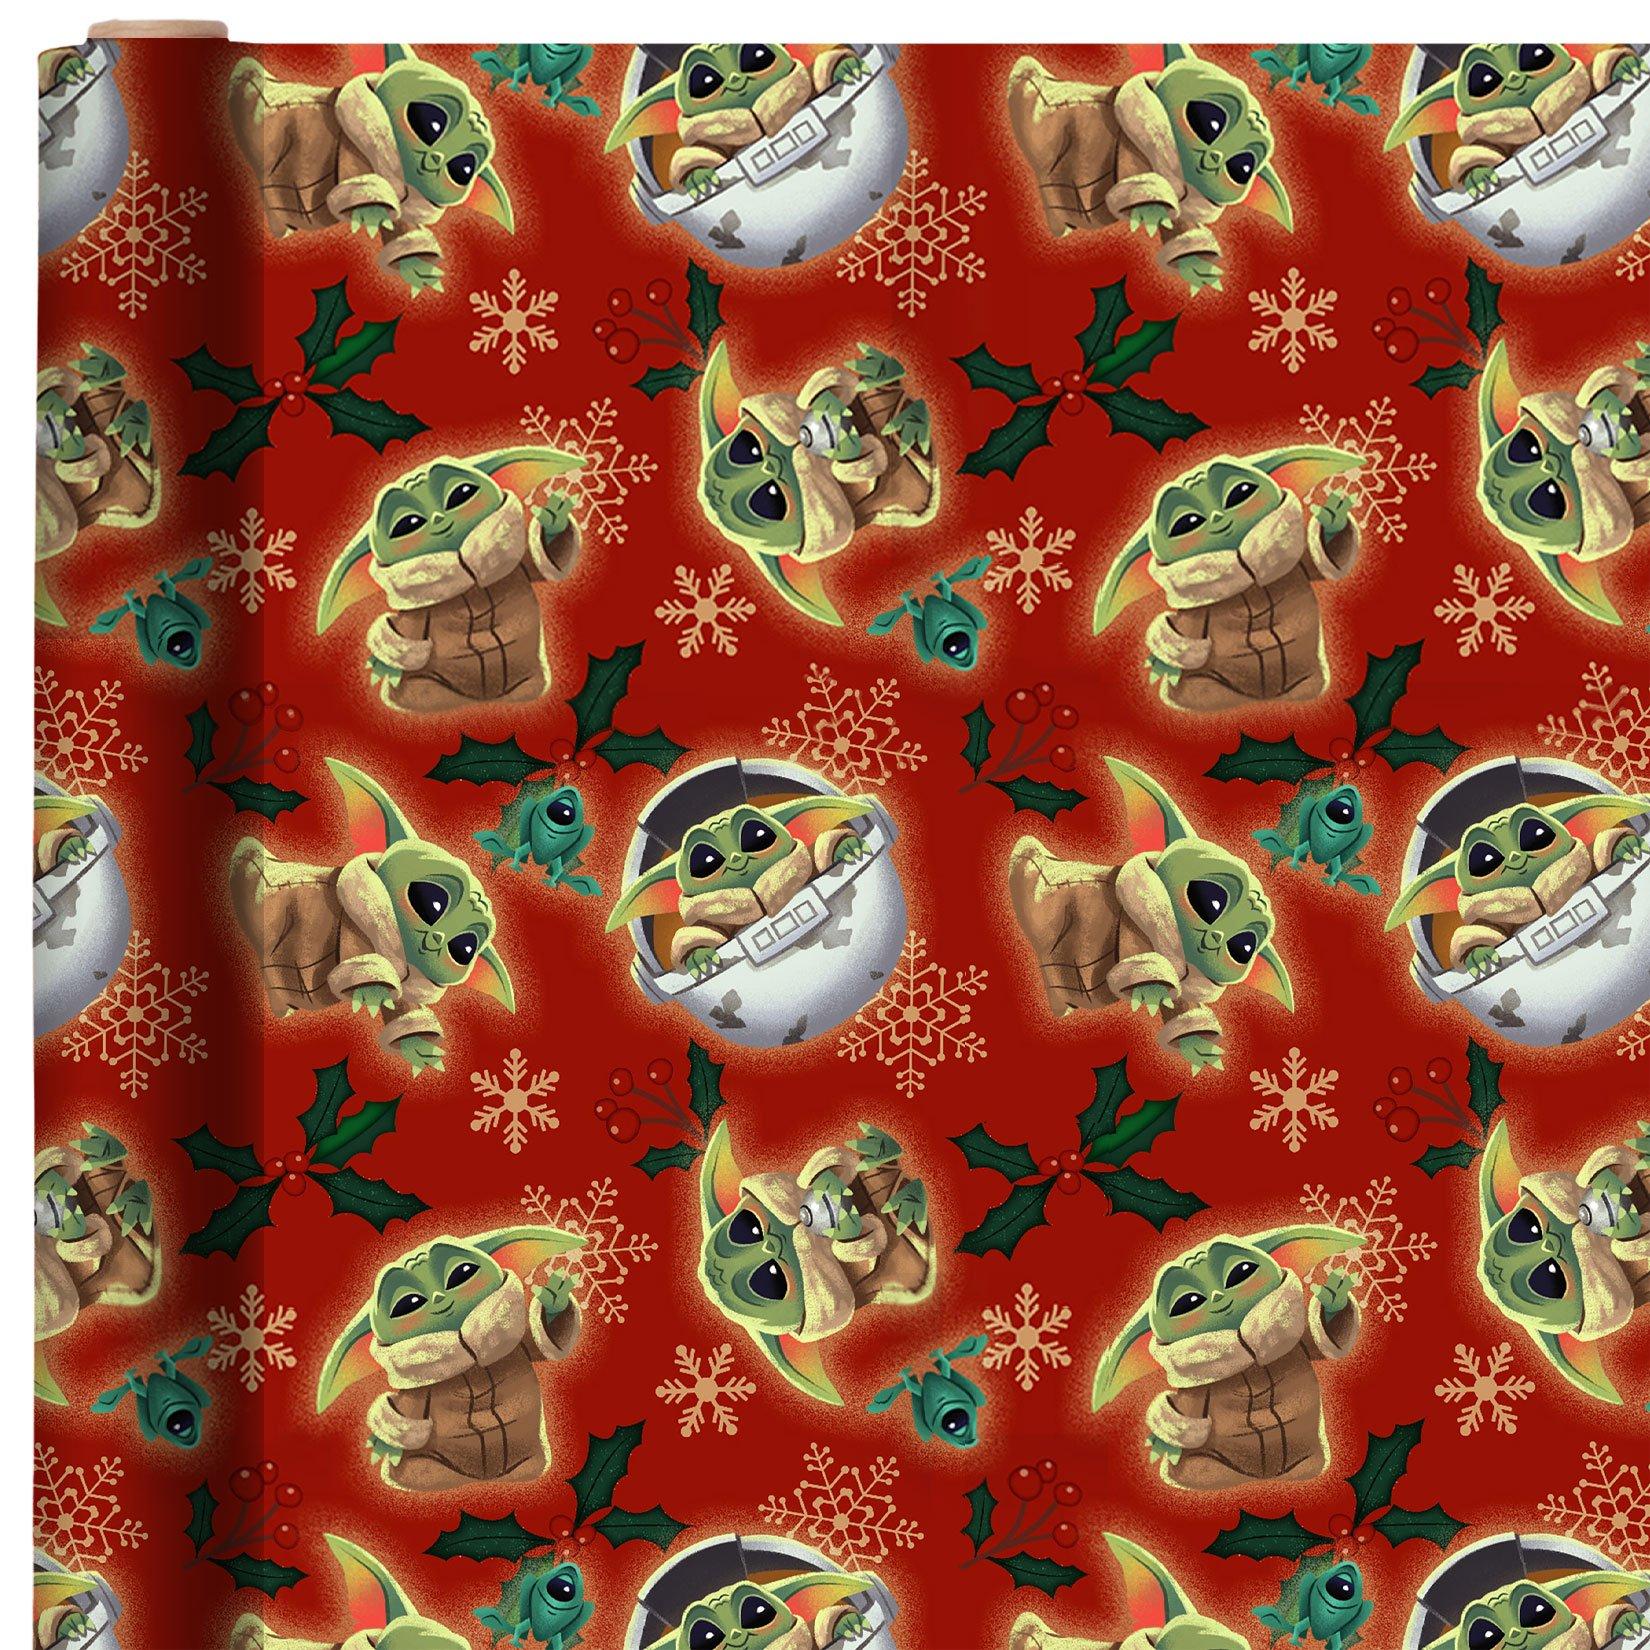 Ja'cor Star Wars Baby Yoda Wrapping Paper Jumbo Rolls, Birthday Christmas All Occasion Holiday Mandalorian Child Gift Wrap Roll Sheets Party Supplies Gifts